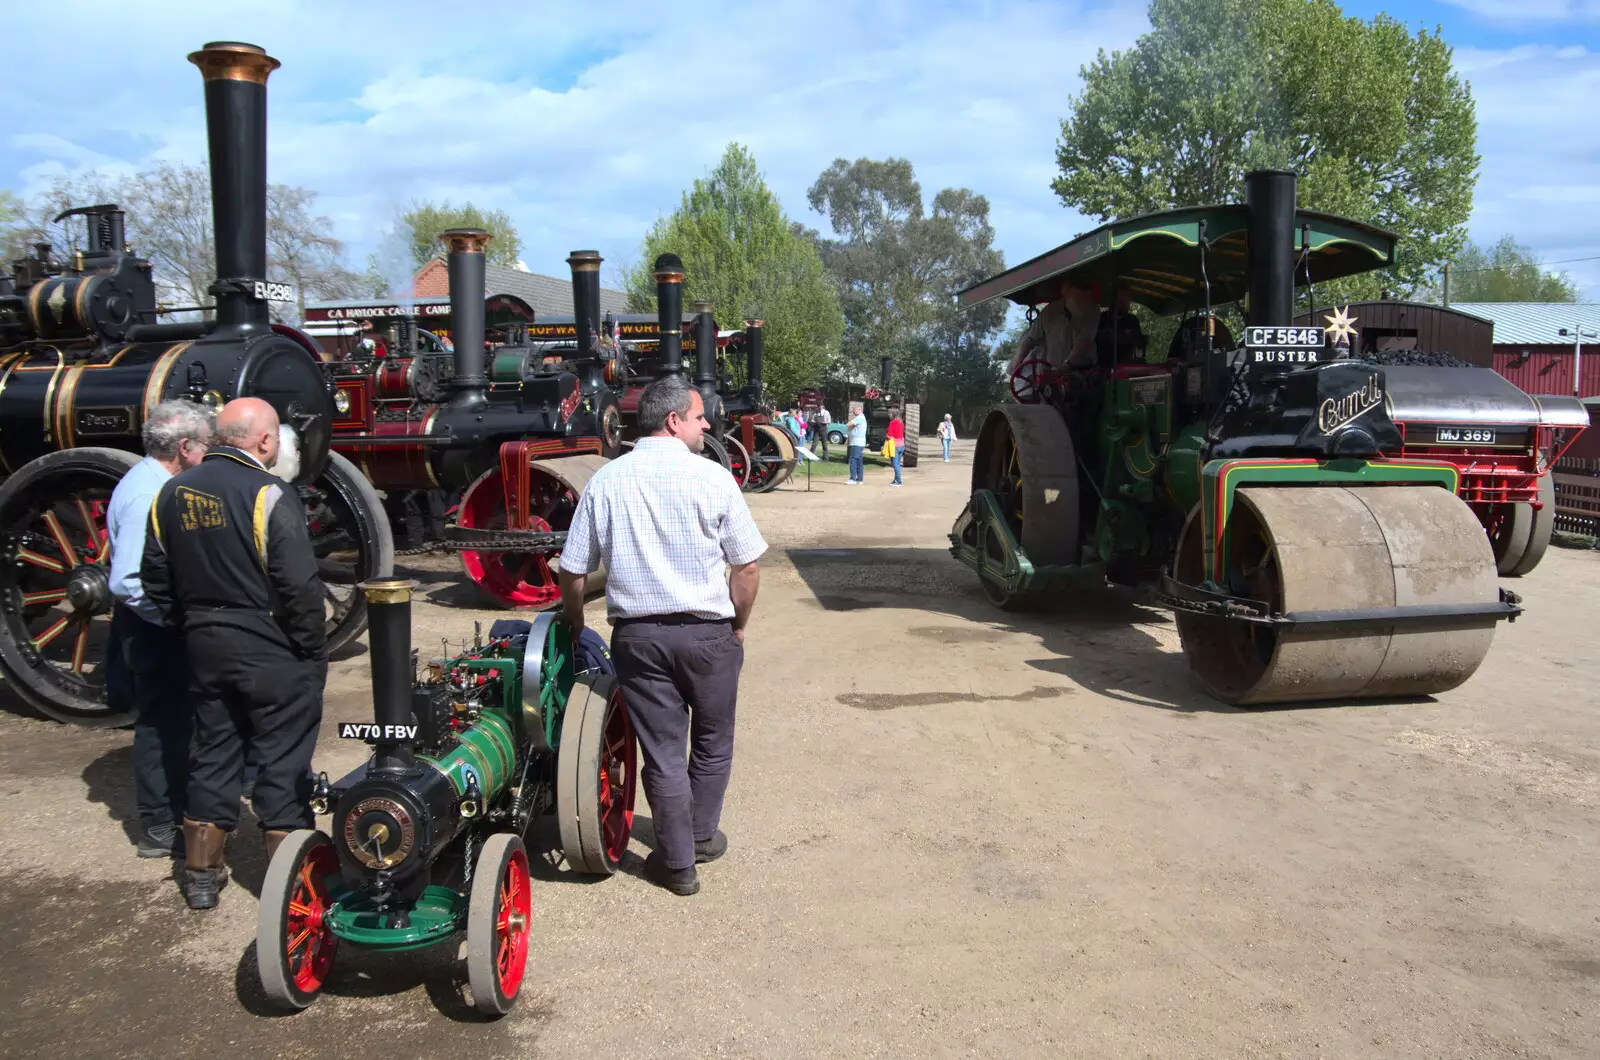 A steam roller named Buster clanks around, from The Heritage Steam Gala, Bressingham Steam Museum, Norfolk - 1st May 2023